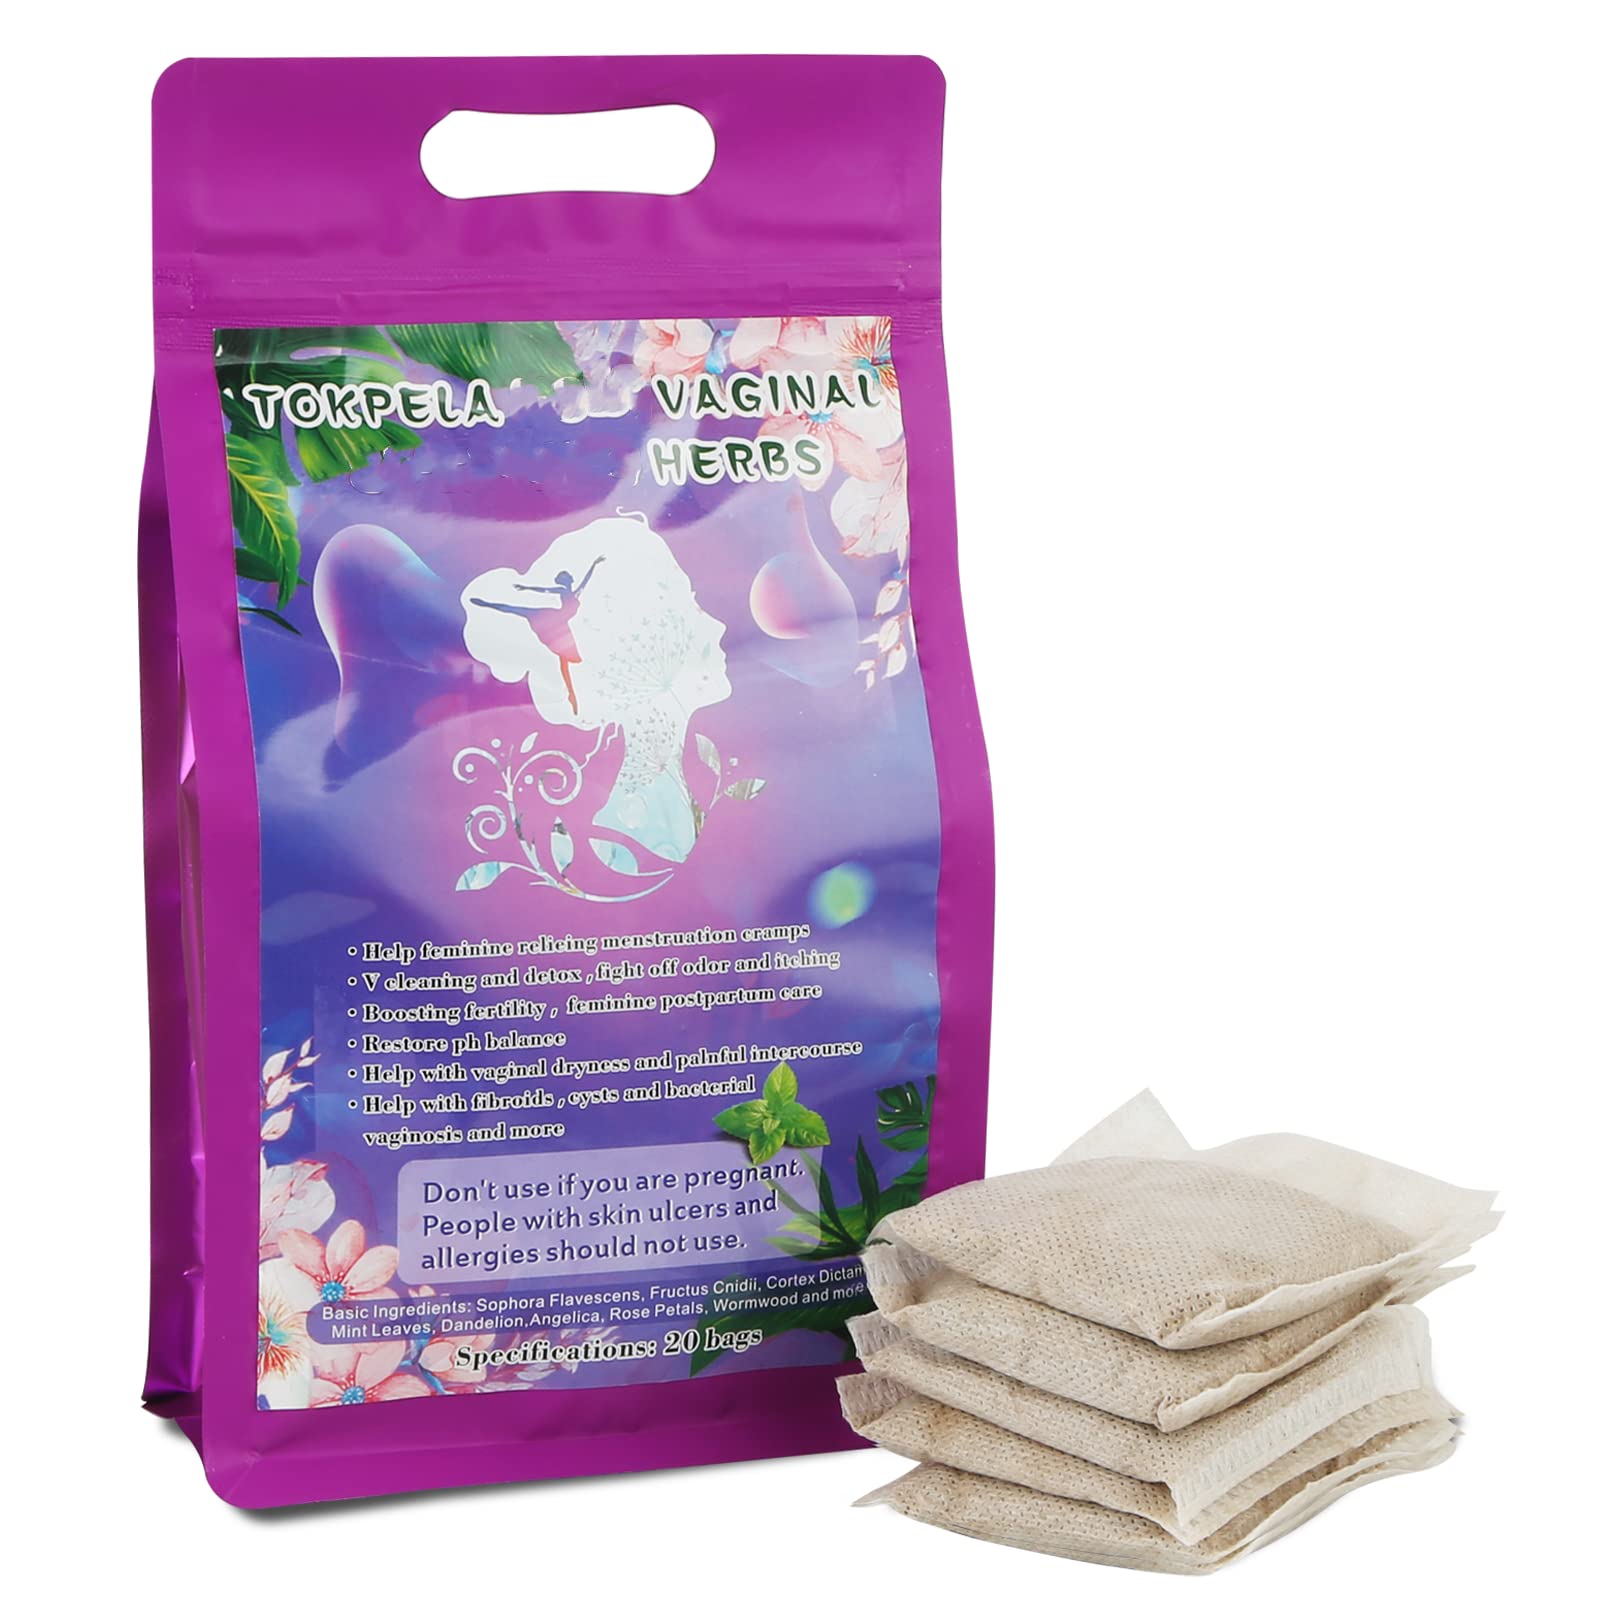 Tokpela Yoni Herbs For Cleansing And Tightening 100 Organic V Steaming Herbsfilter Bag